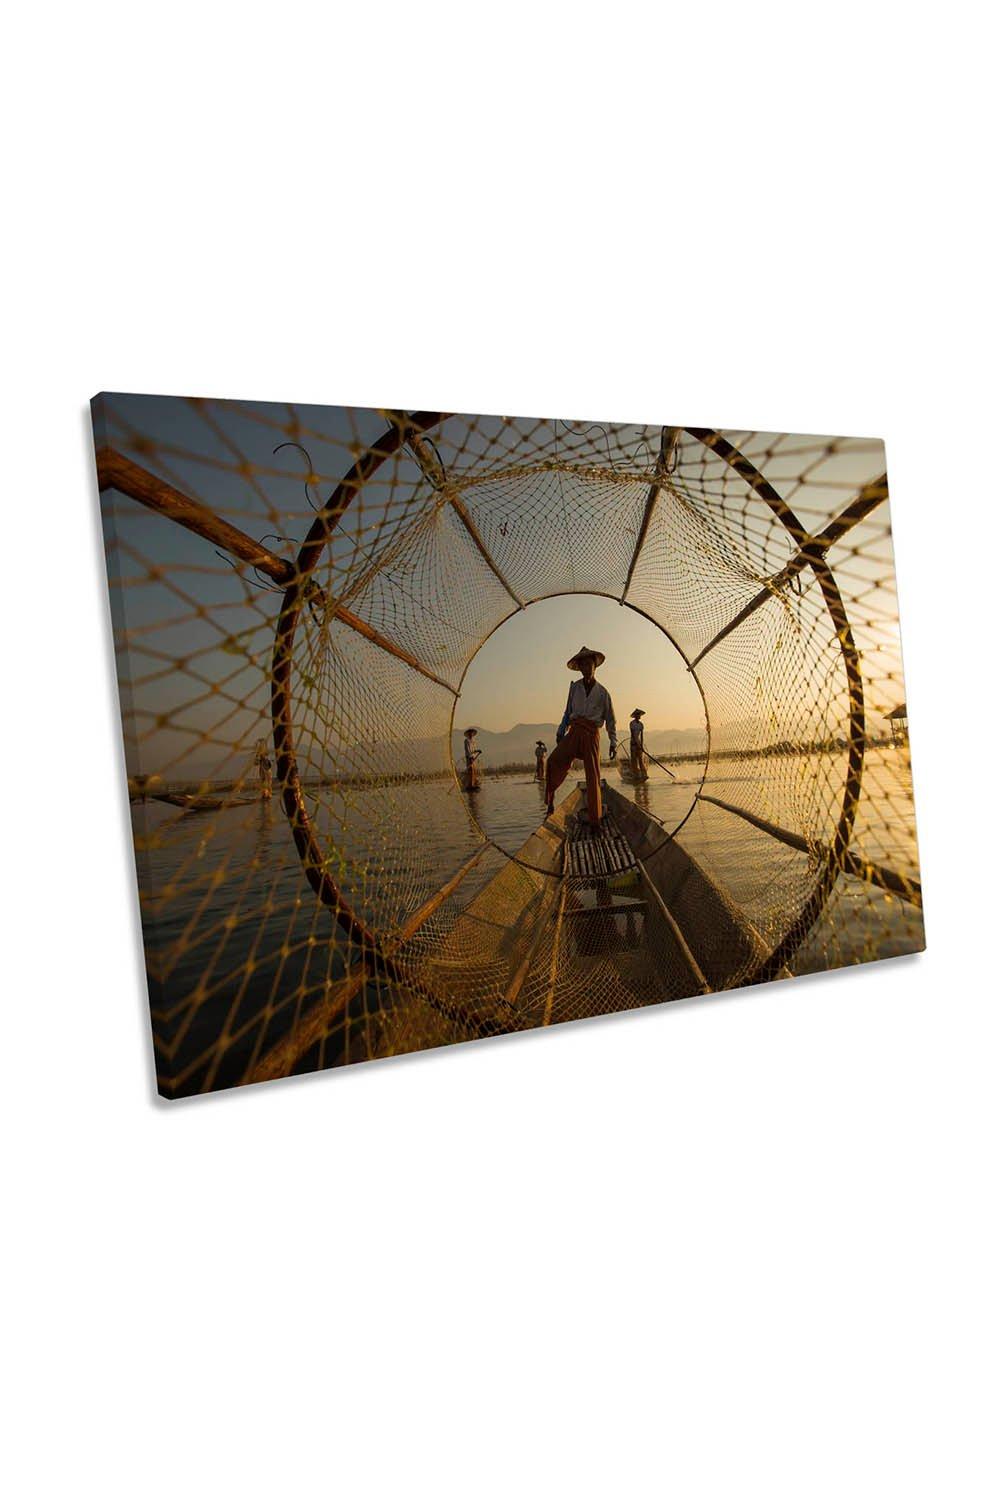 Inle Fisherman River Canvas Wall Art Picture Print